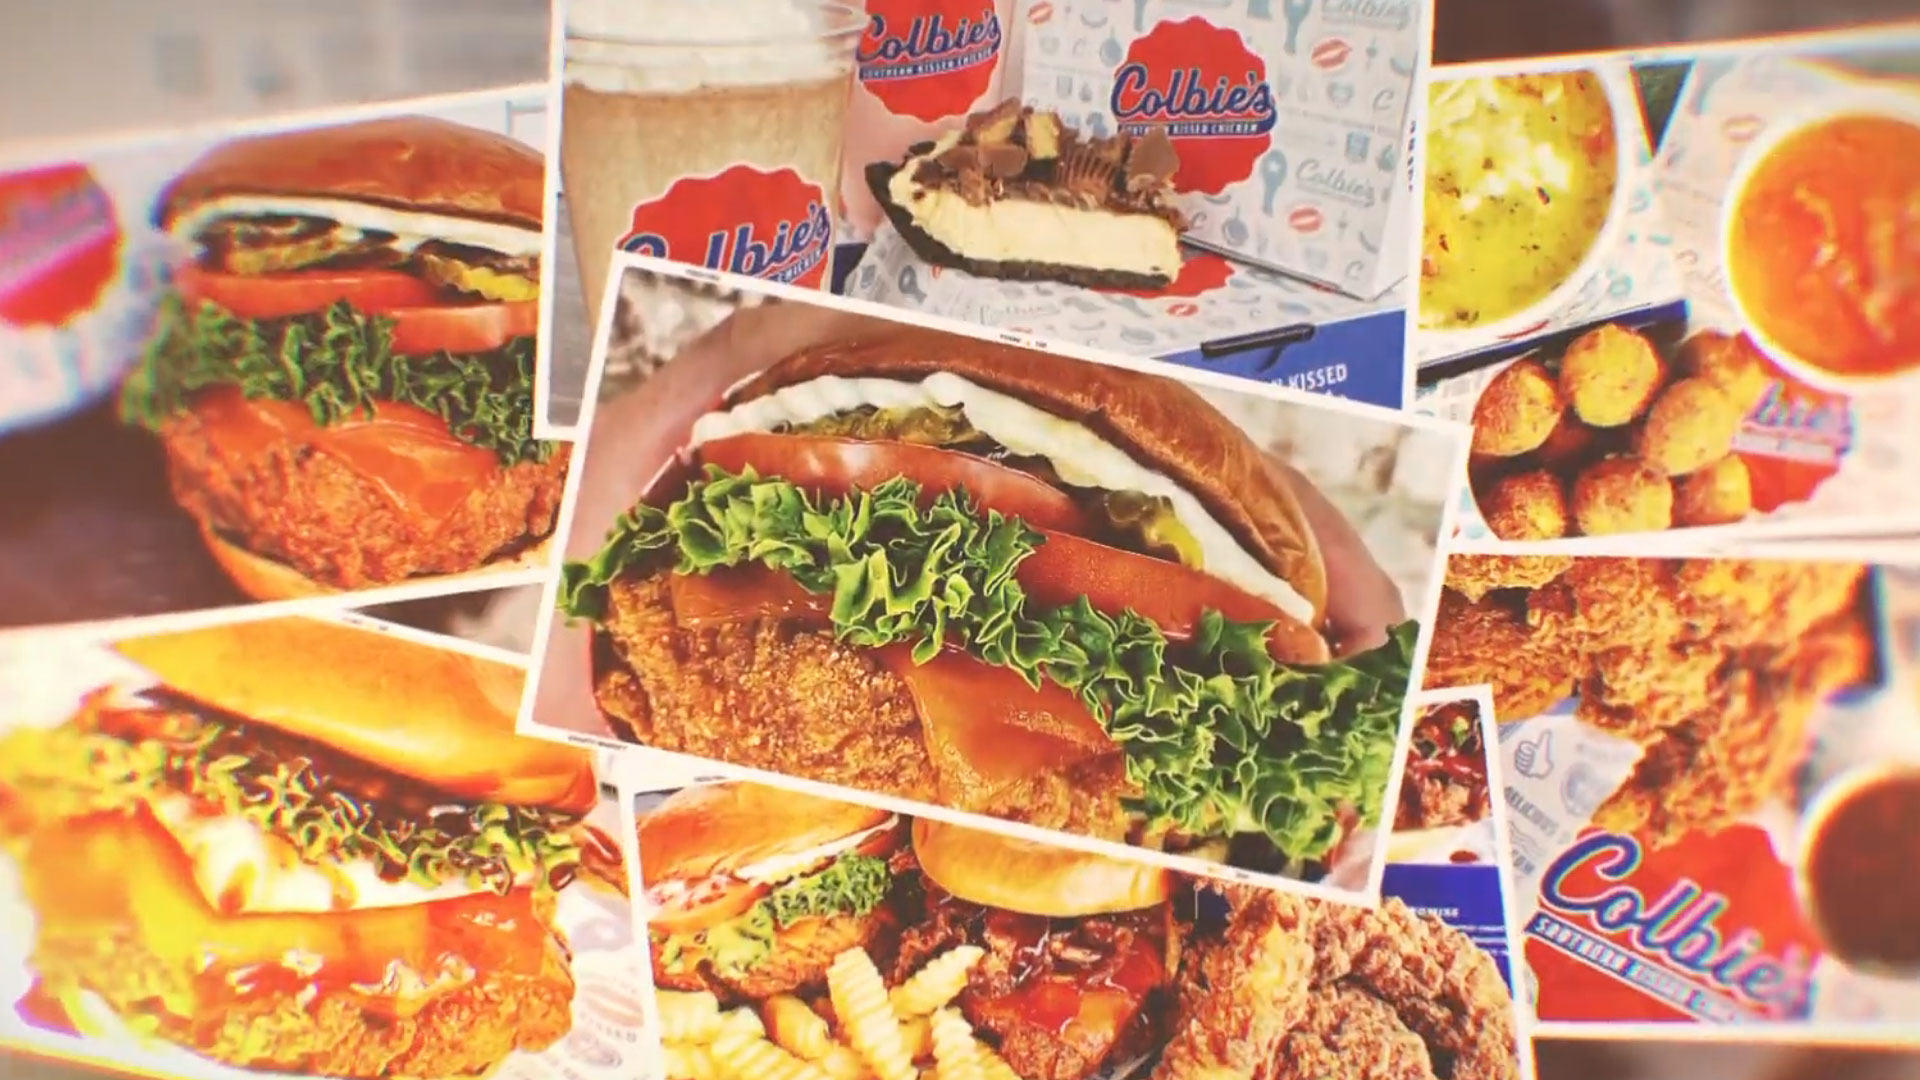 Promo Video Colbie’s, Southern Kissed Chicken – Mount Holly, New Jersey – Made with After Effects